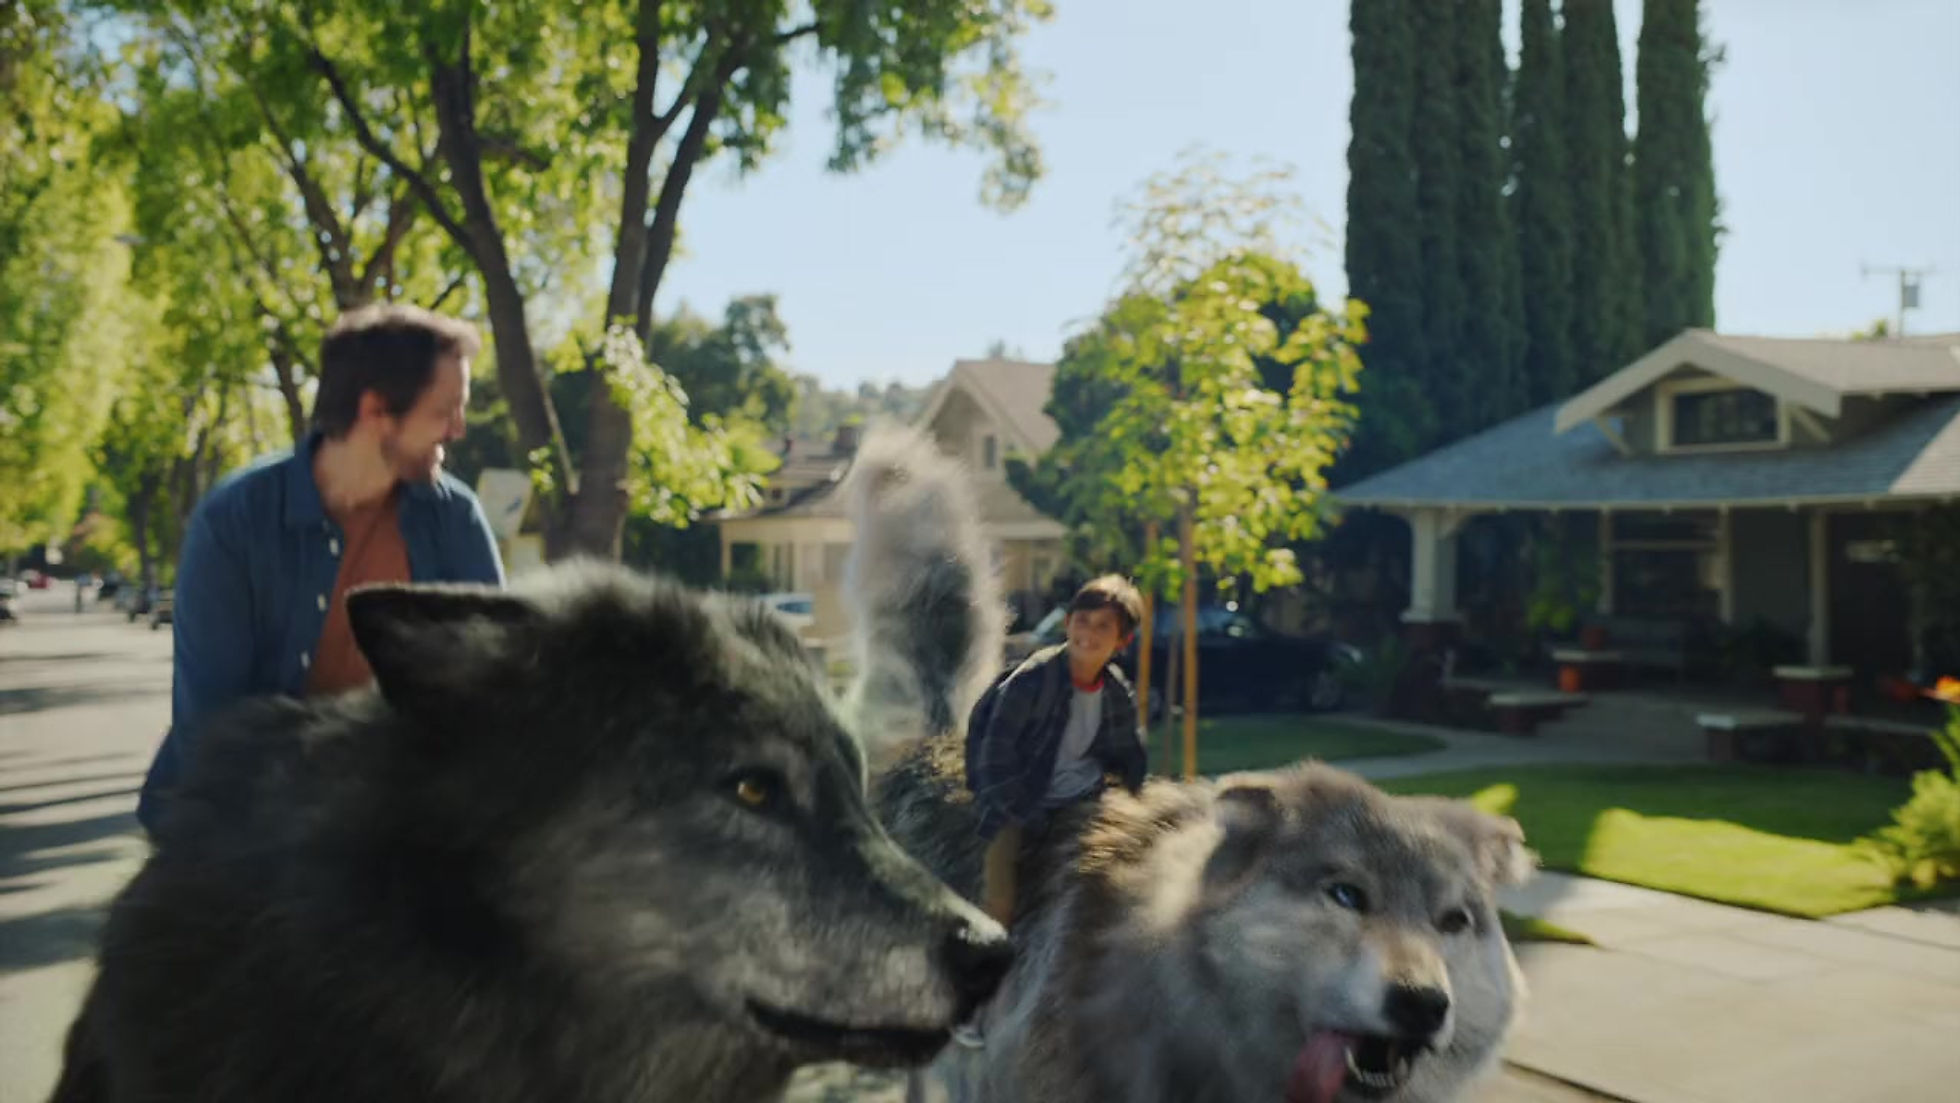 great_wolf_lodge,_strengthen_the_pack_campaign,__picked_up_by_wolves___30 (720p)